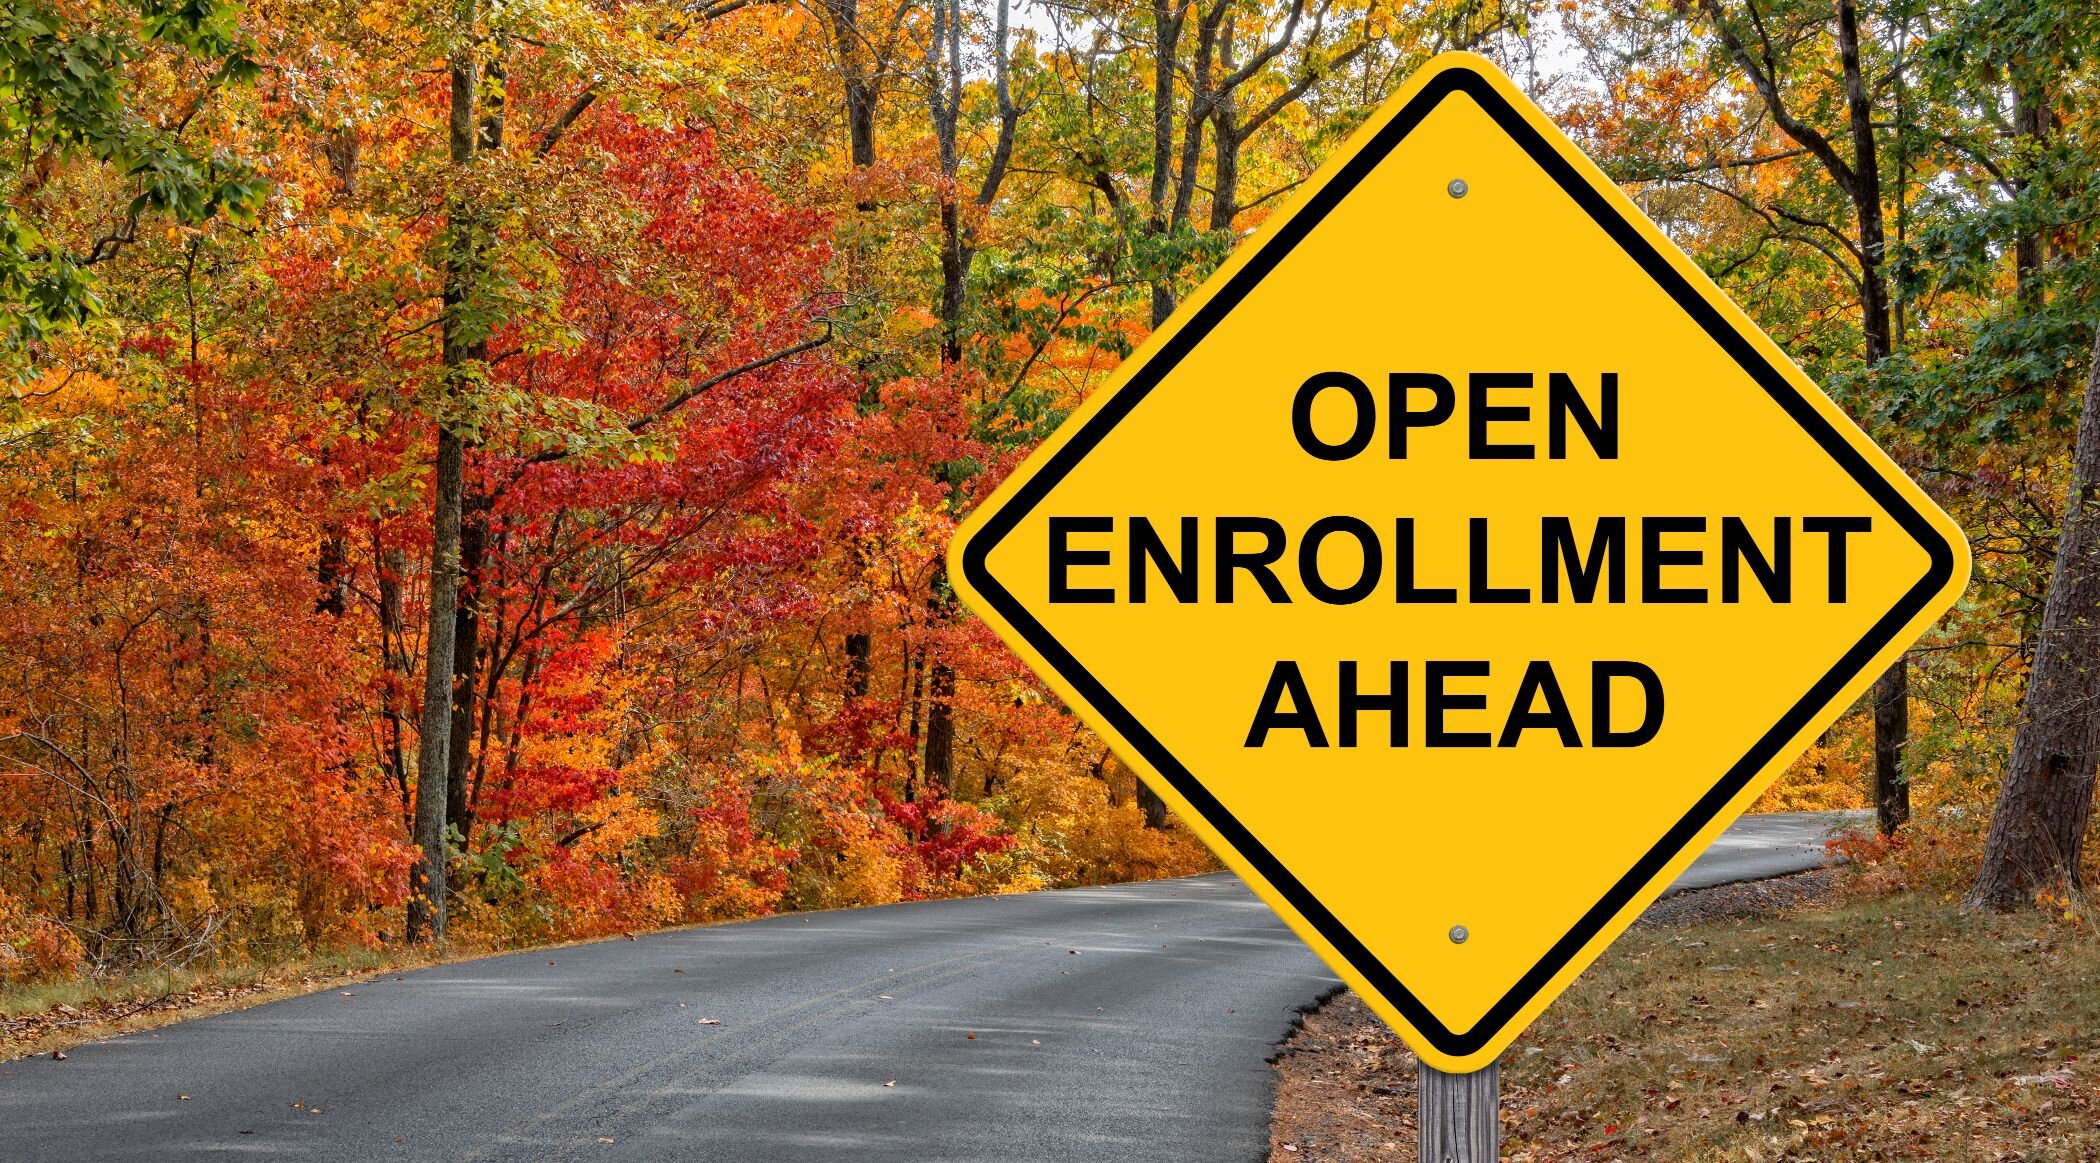 Canva - Open Enrollment Caution Sign reduced to smaller size.jpg